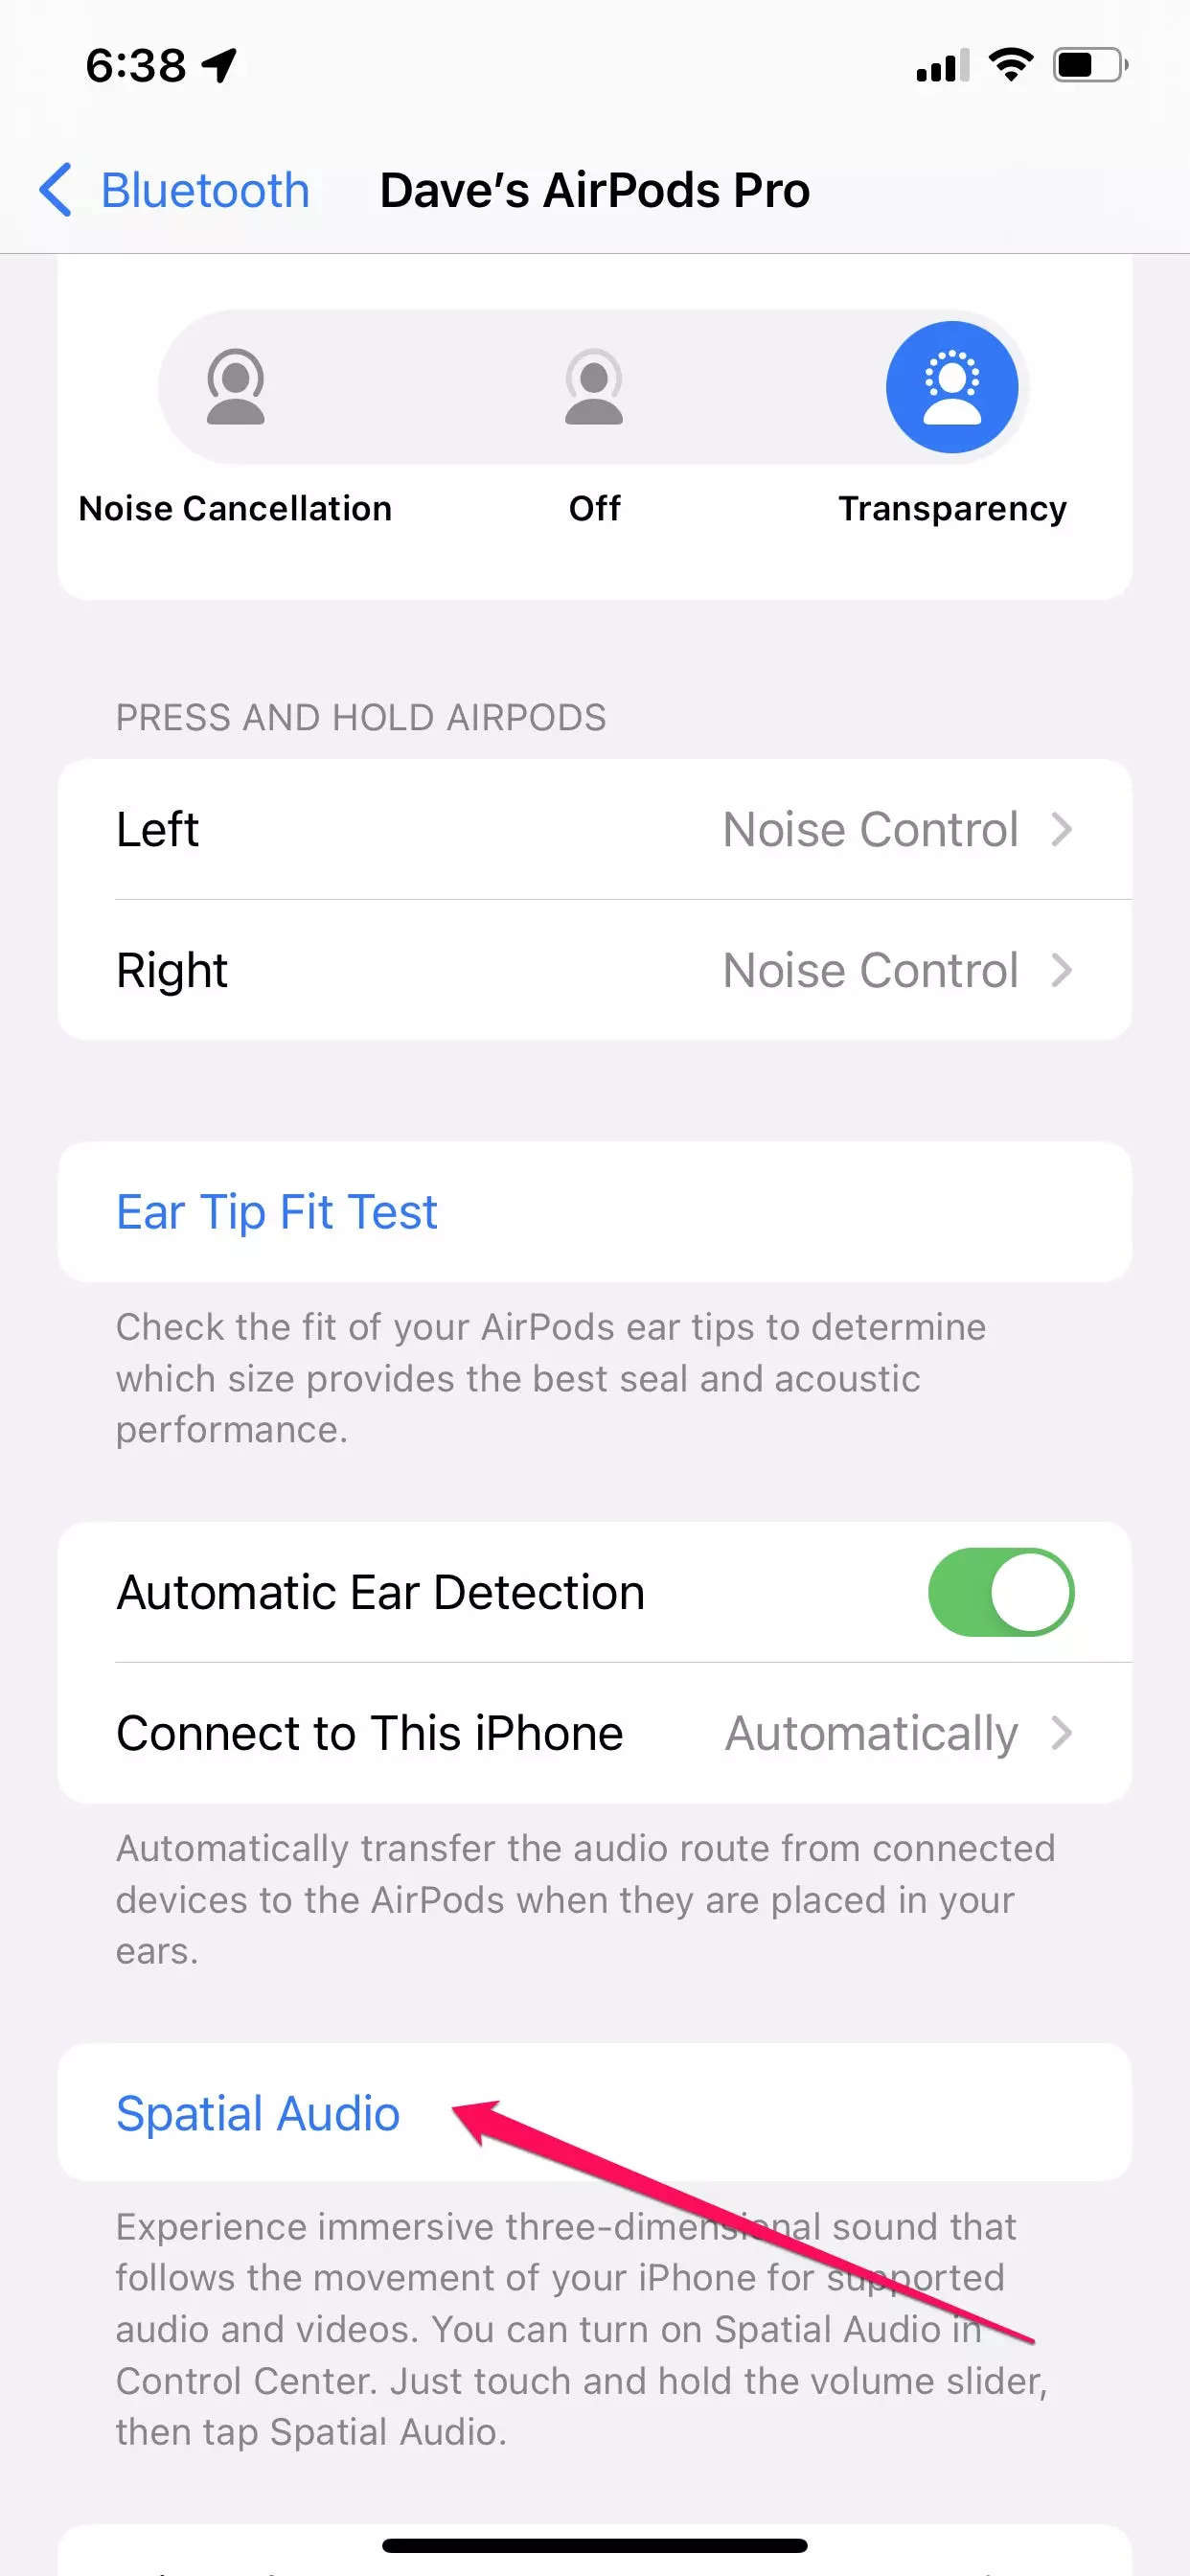 How to use your AirPods' spatial audio feature and experience immersive surround sound Business Insider India